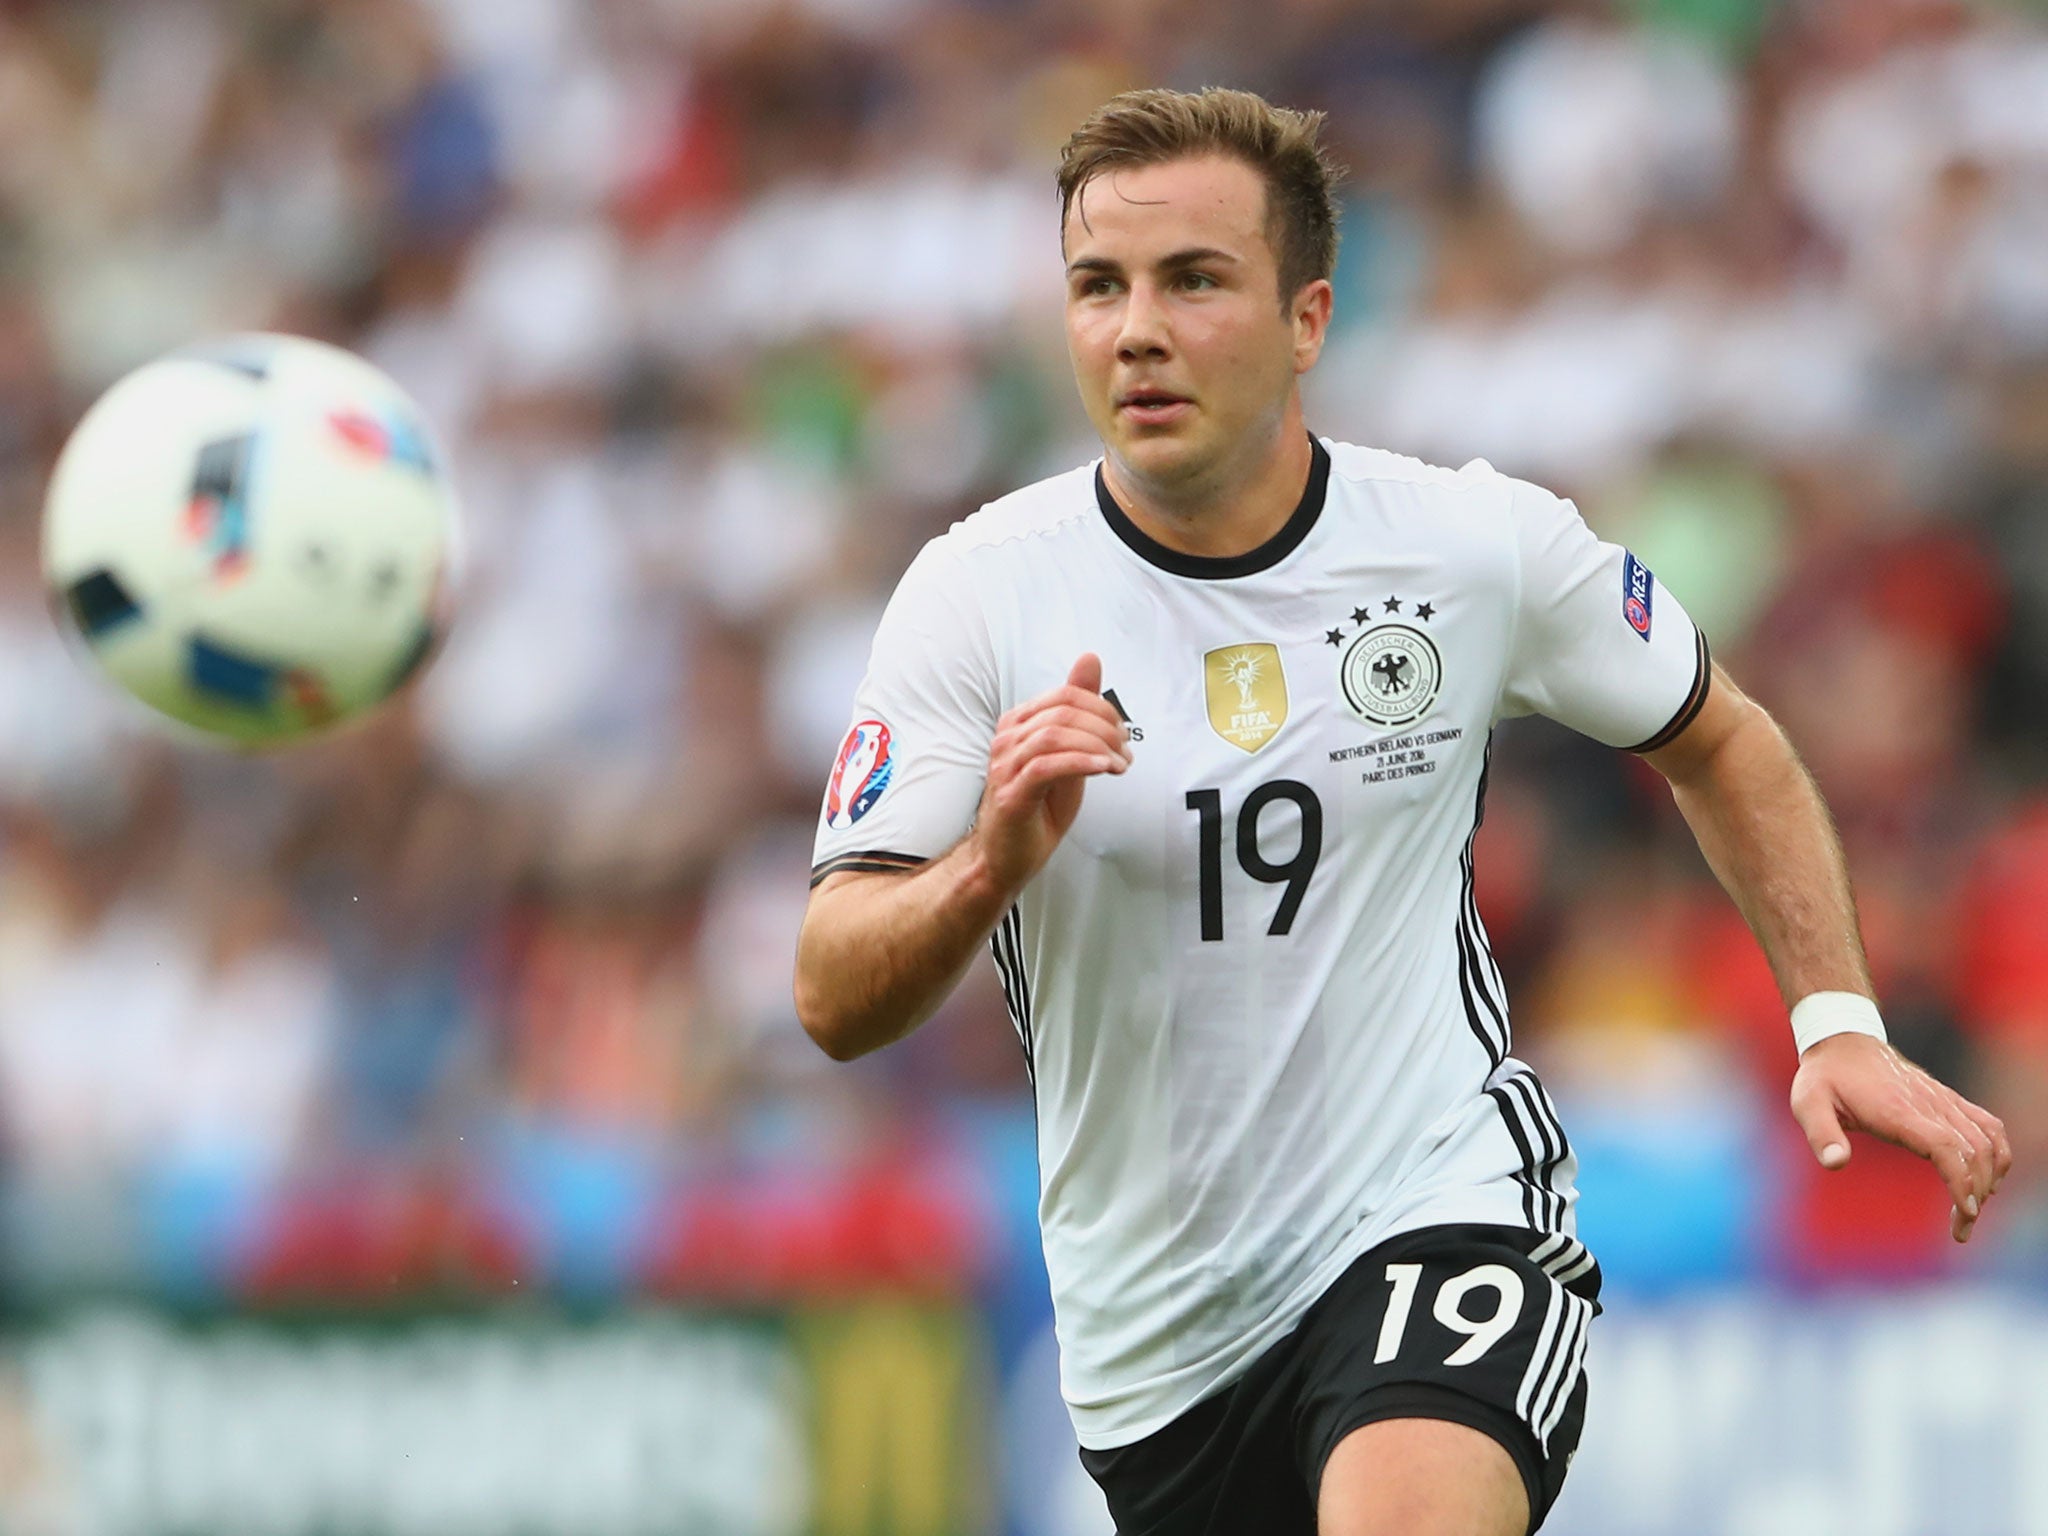 Gotze struggled to make an impact for Germany at Euro 2016